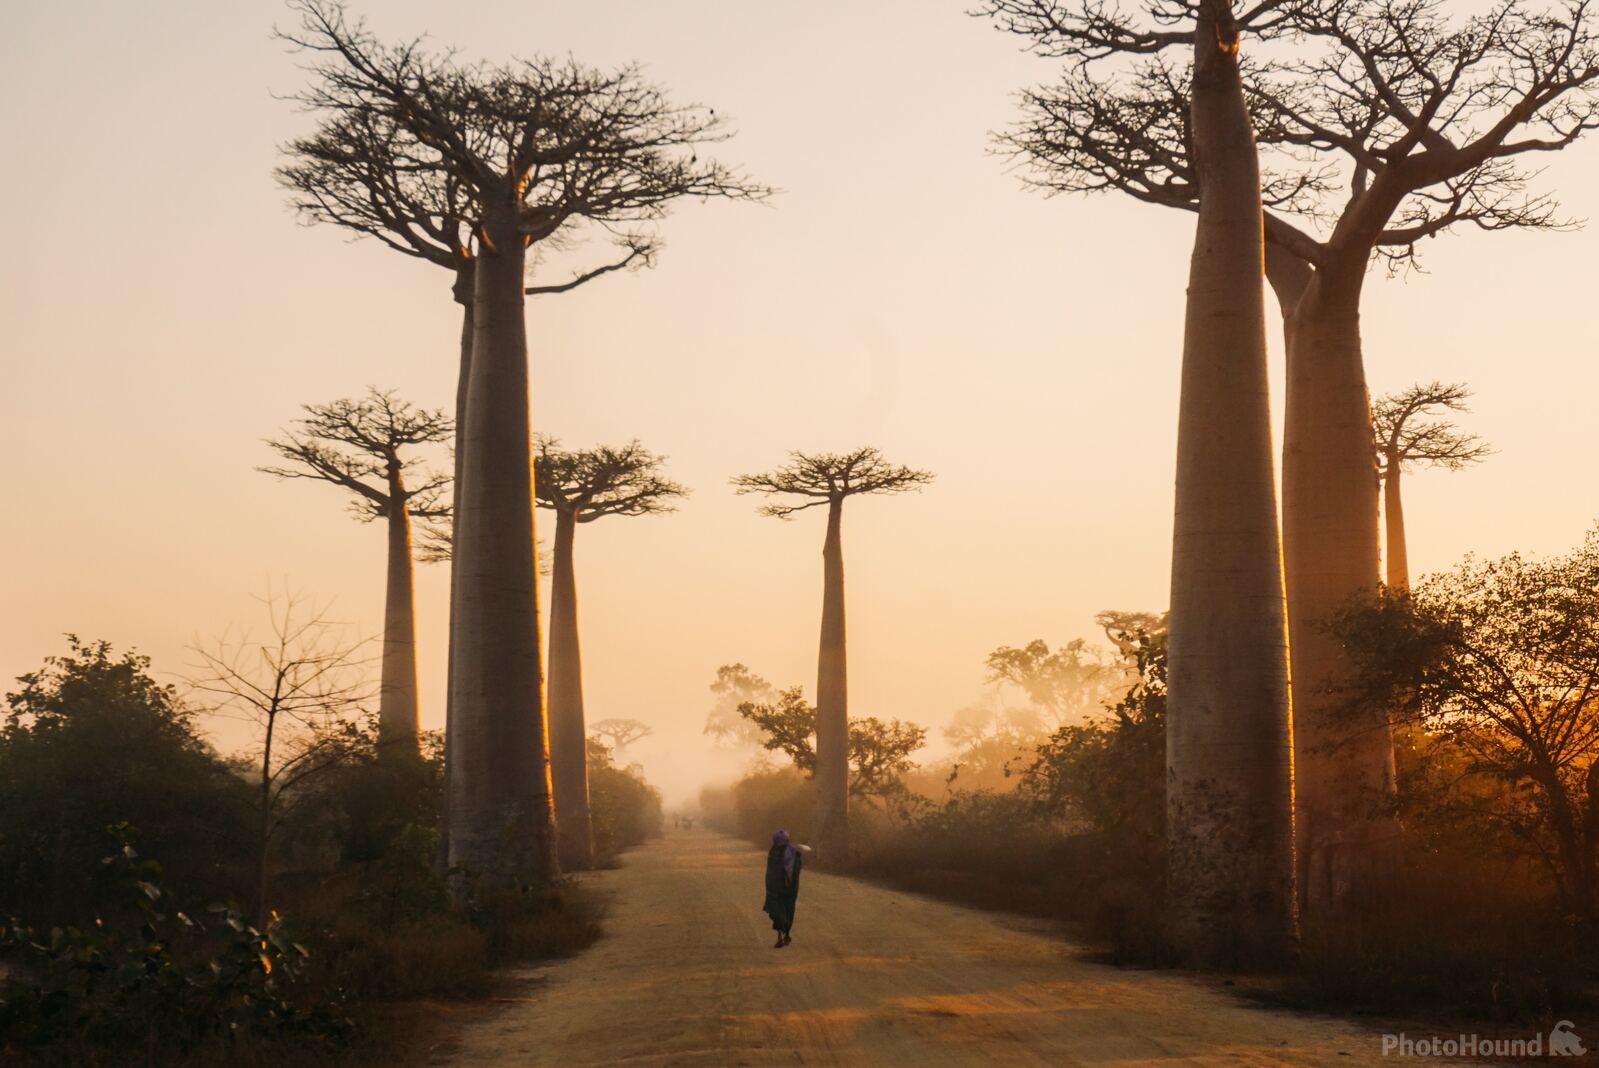 Image of Avenue of the Baobabs in Morondava by Team PhotoHound